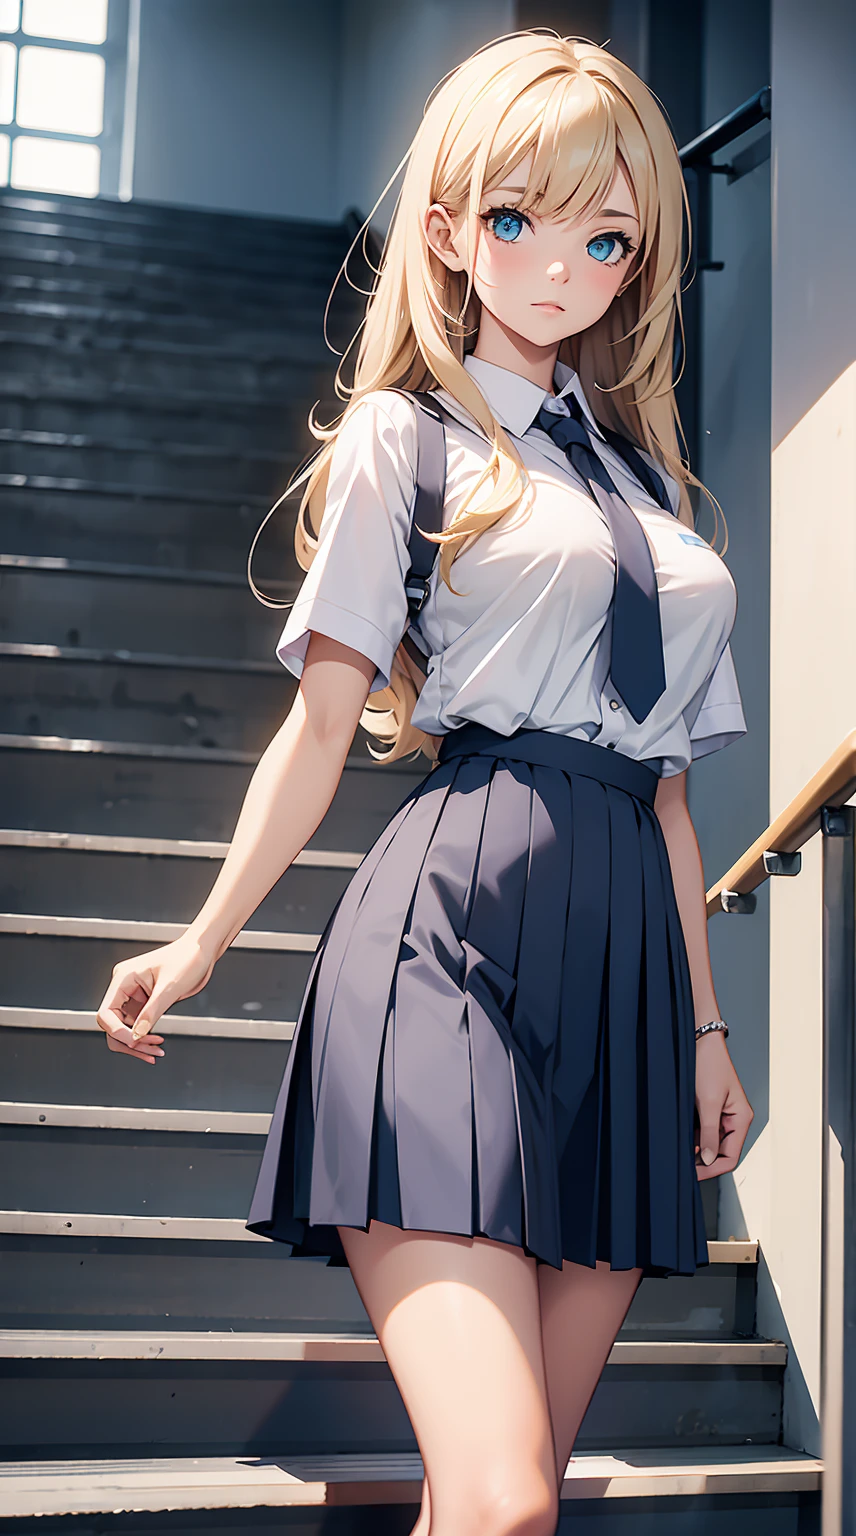 Masterpiece,stunning realistic,best quality,sharpness,1 girl standing in a school,standing on school stairs,wearing a jk ,white shirt,dunkelblaue krawatte,dunkleblauer Rock,blonde middle long straight hair hair,green eyes,middle large 